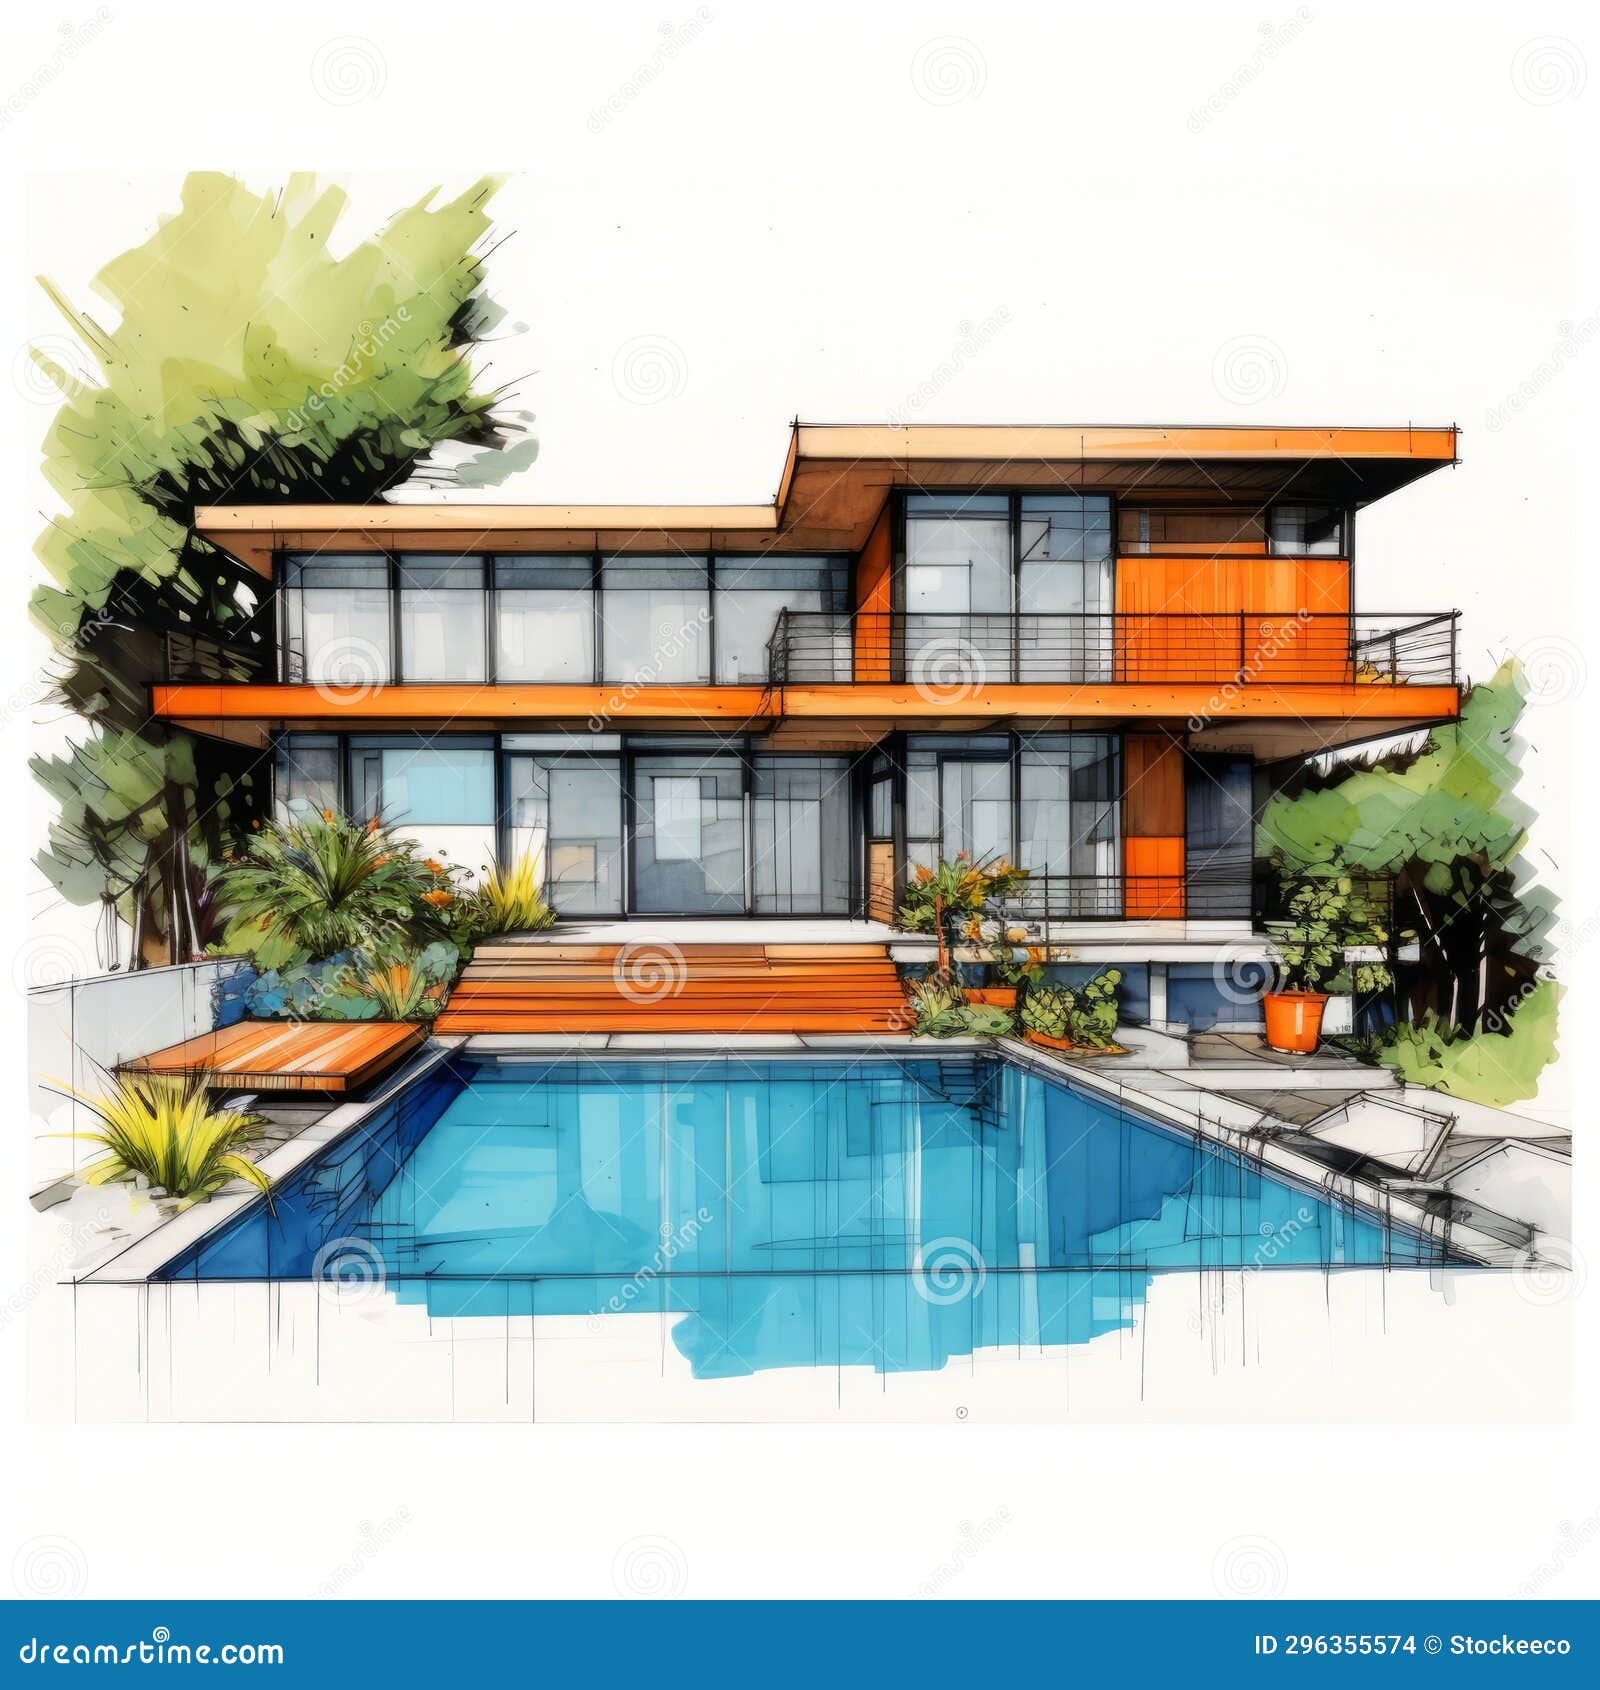 modern house with pool: artistic drawing in orange and indigo